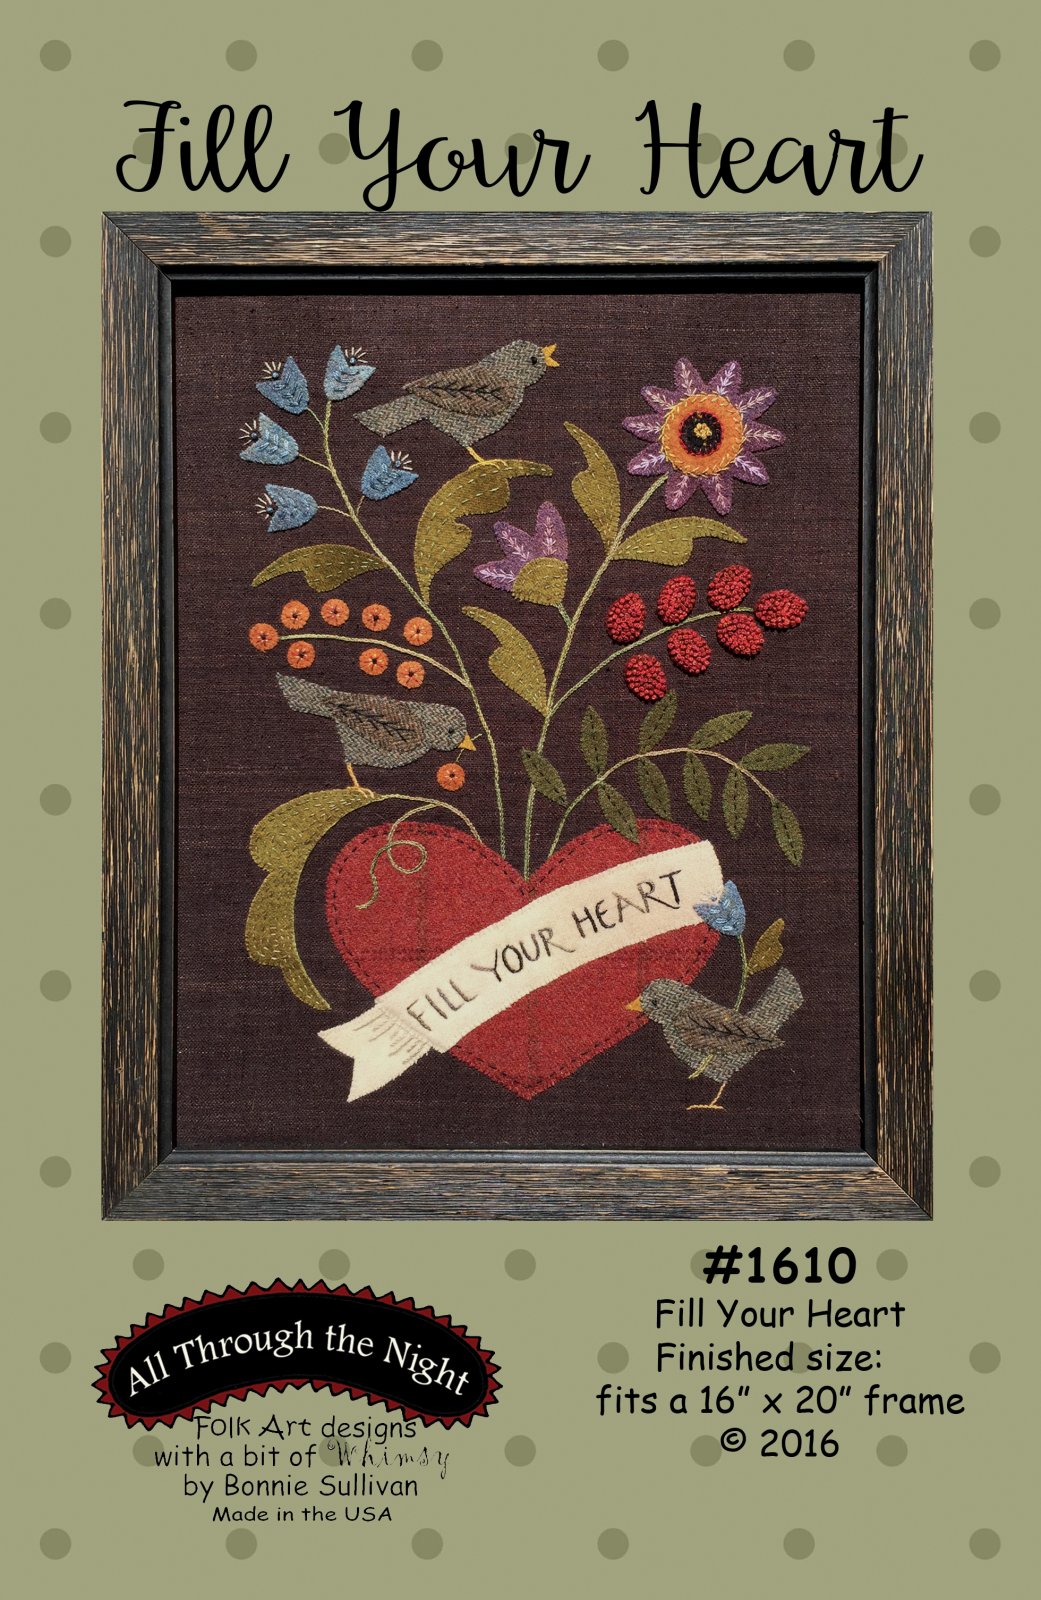 1610 - Fill Your Heart